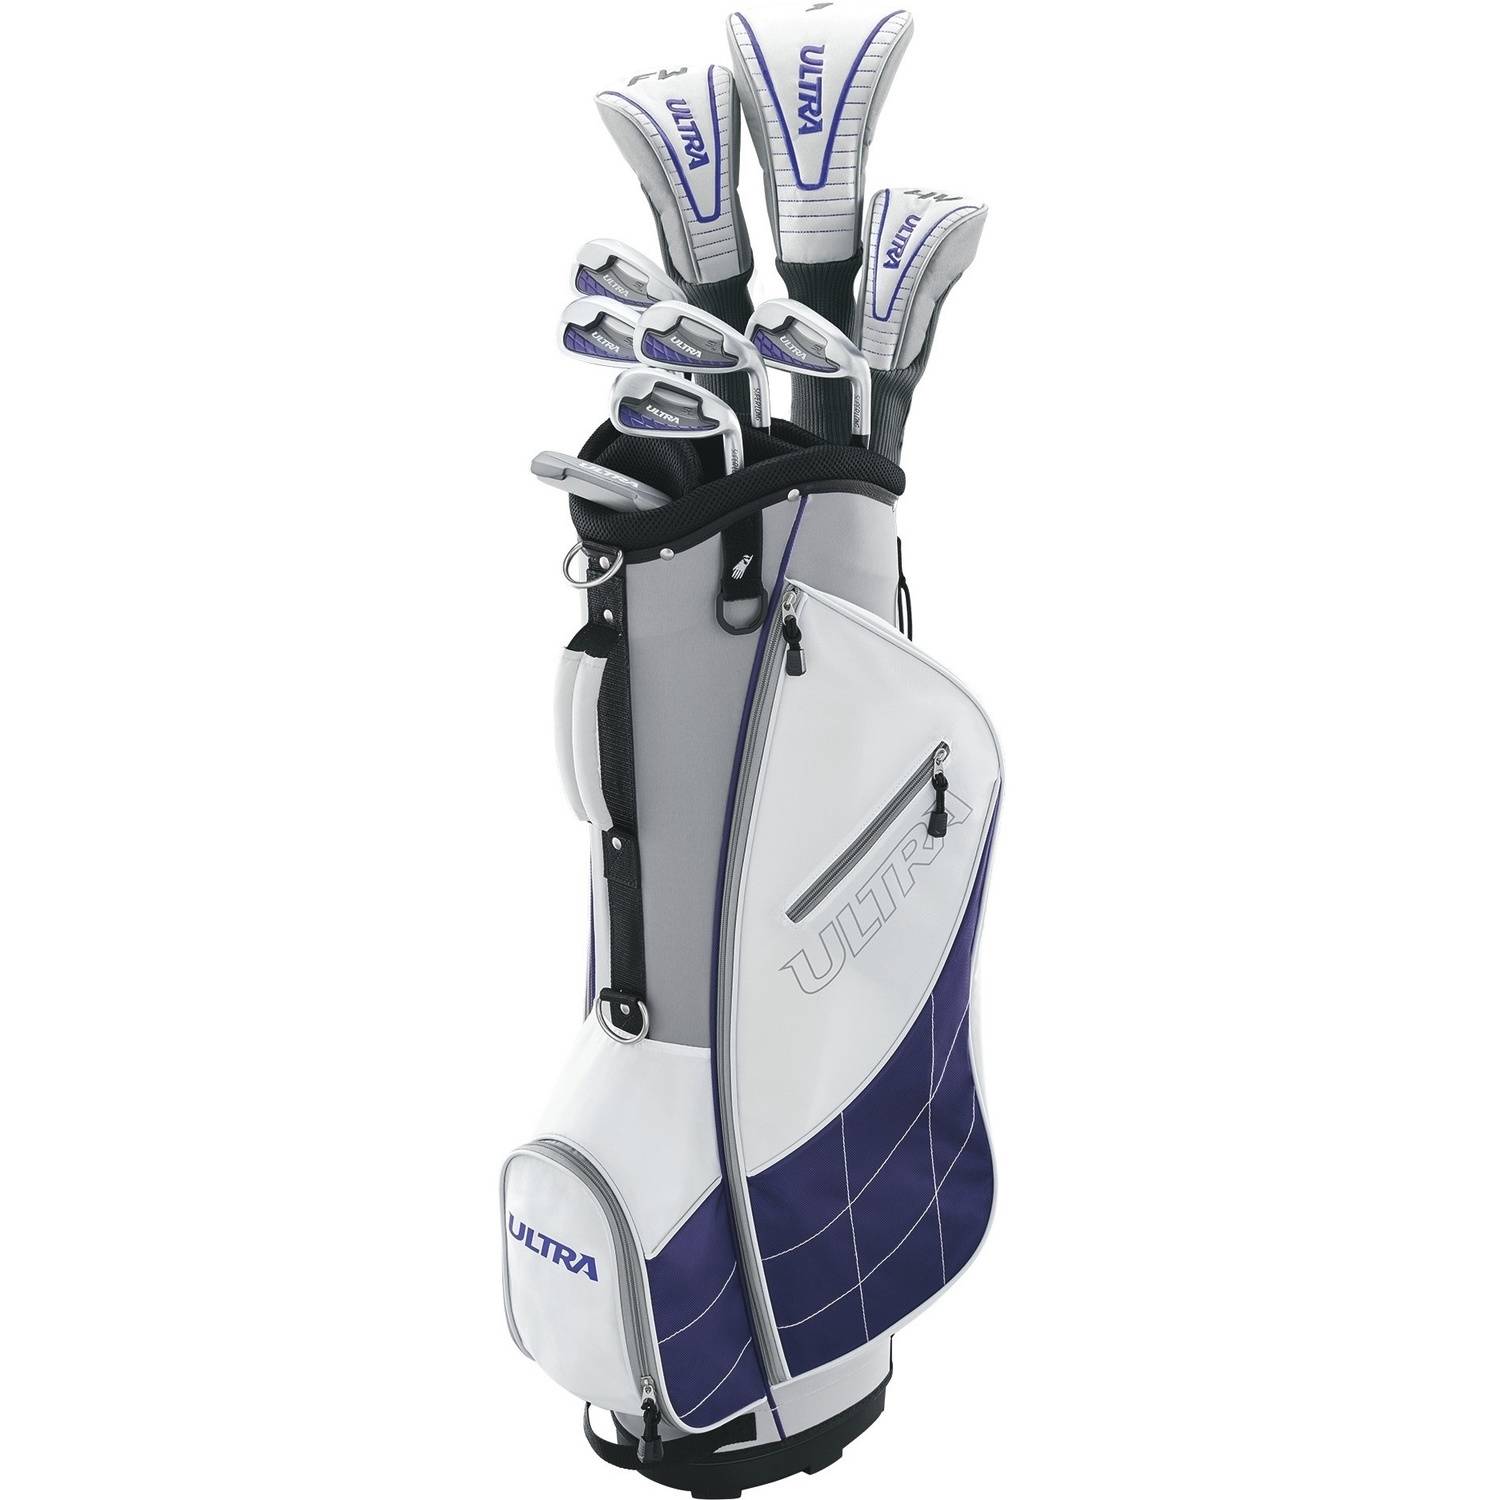 Wilson Ultra men’s and women’s golf sets for $145